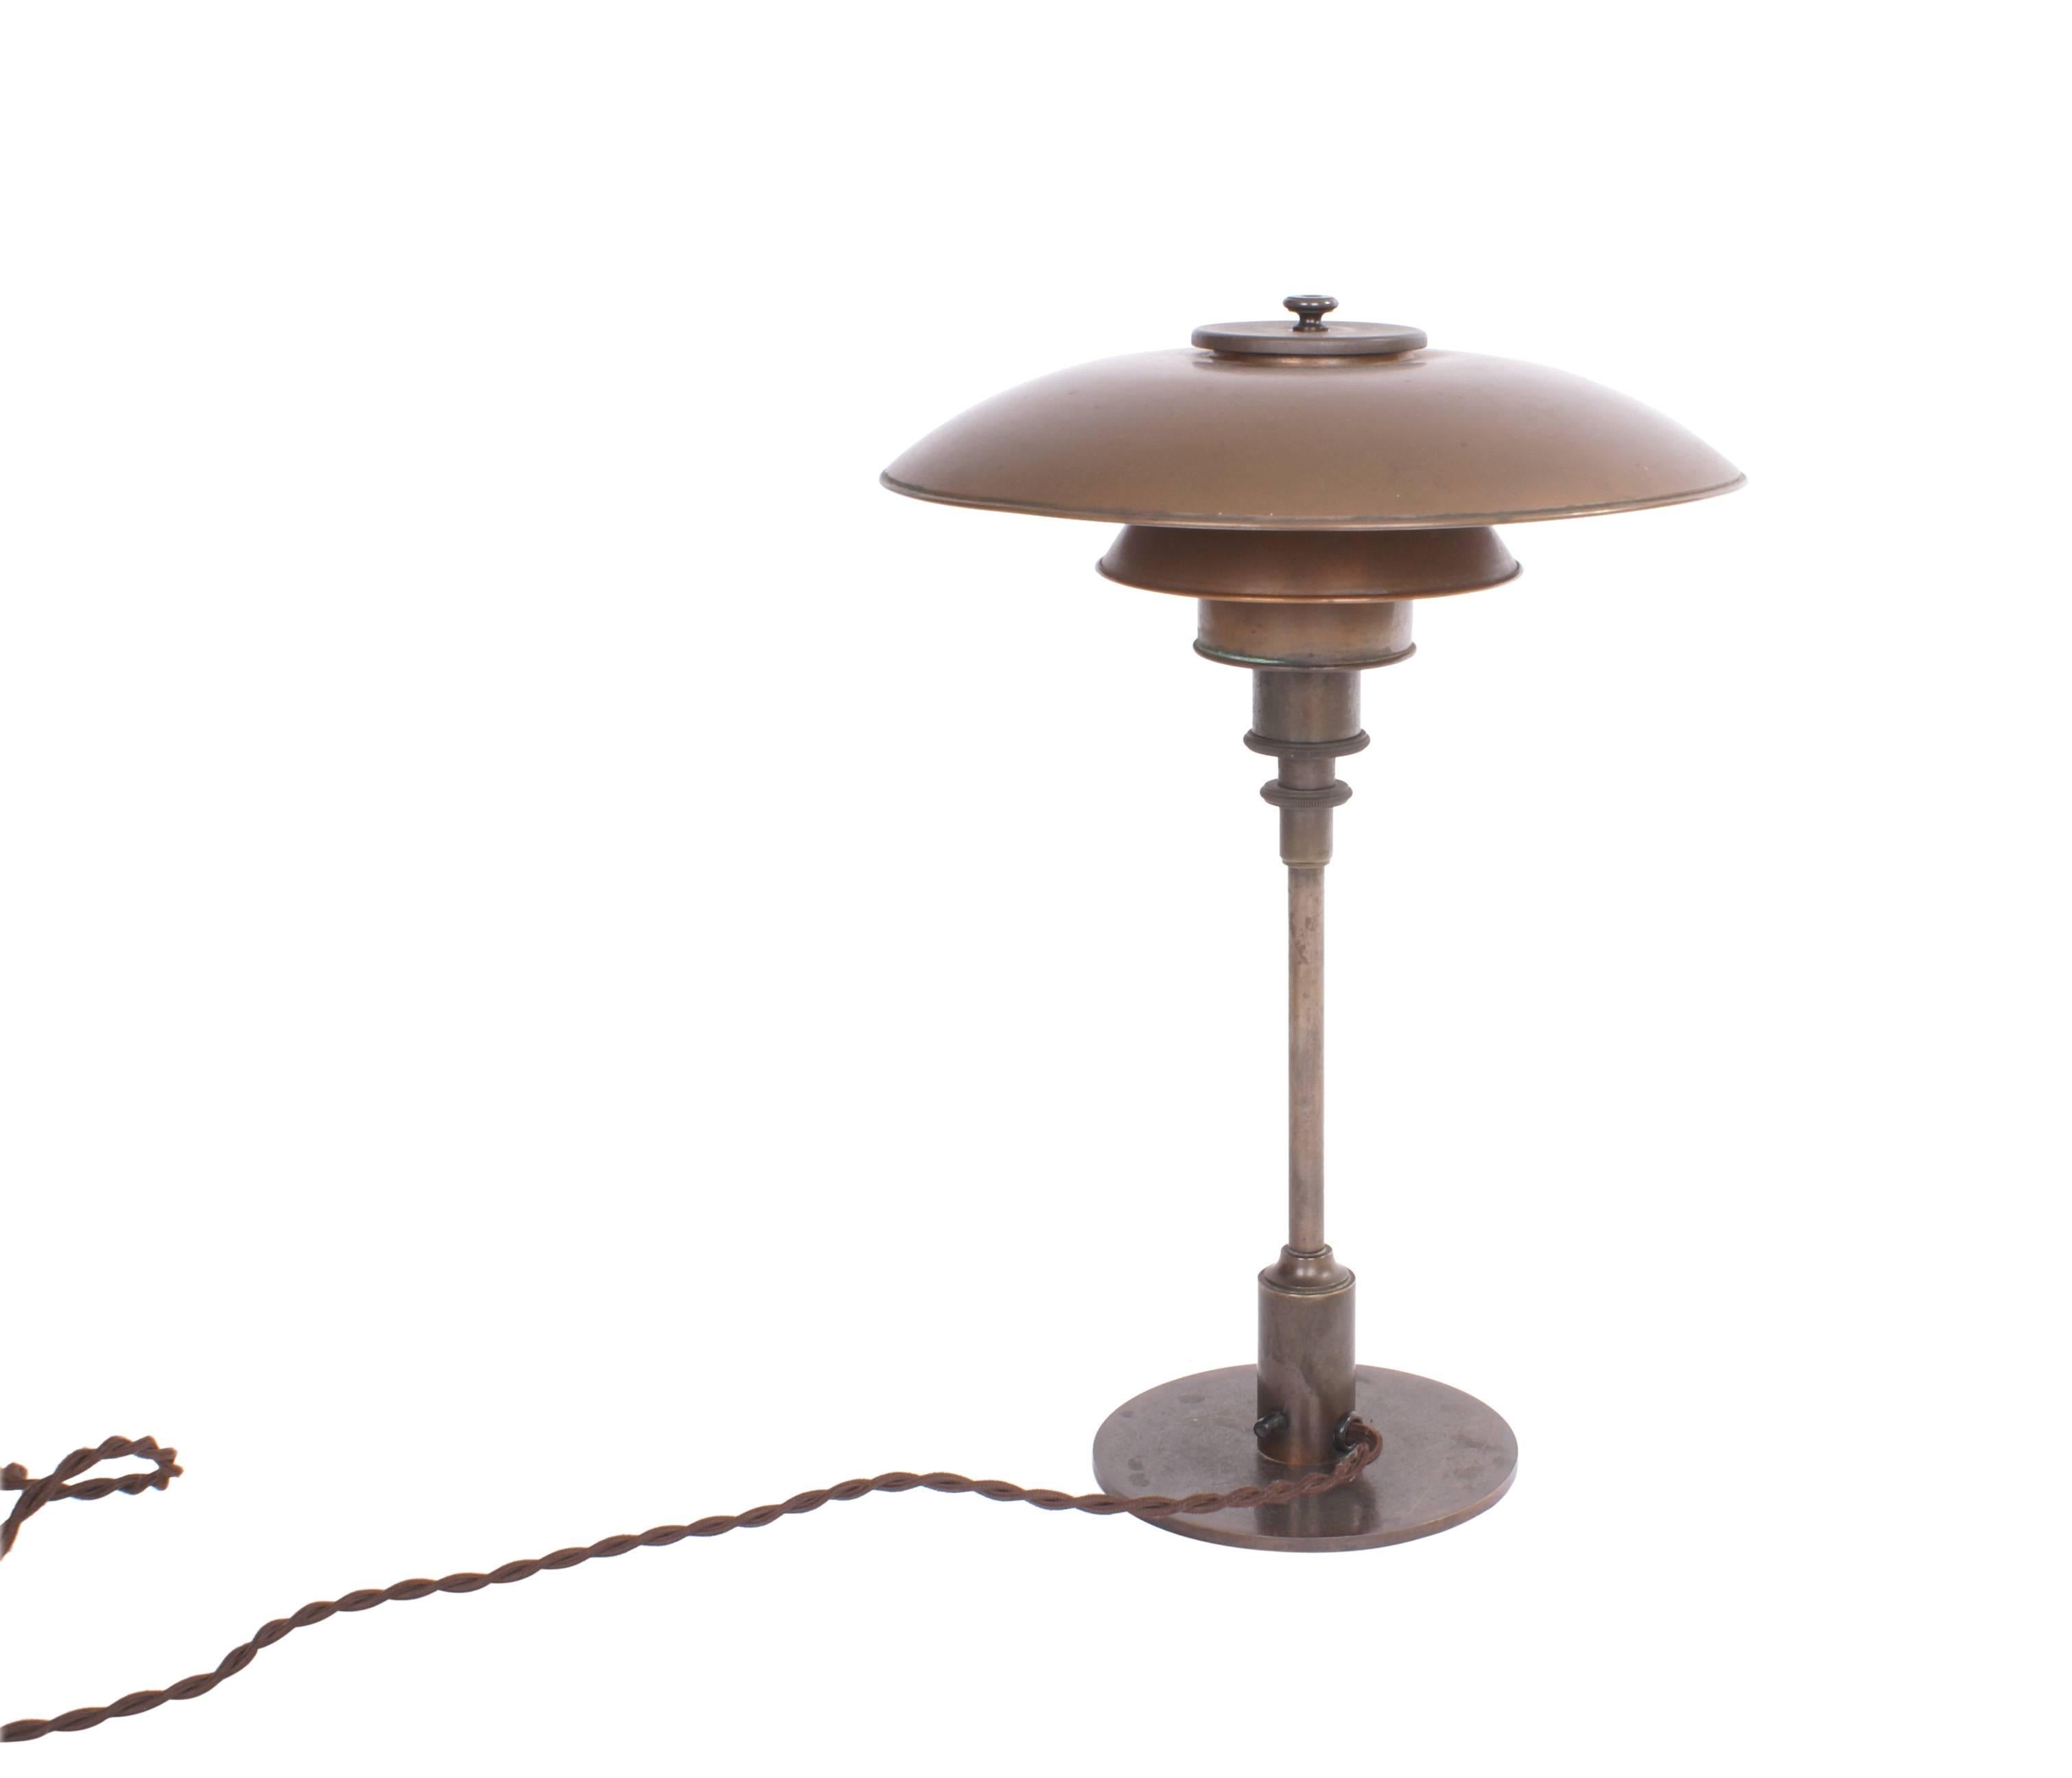 Danish Poul Henningsen PH 3/2 Desk Lamp with Copper shades - dated 1926-28